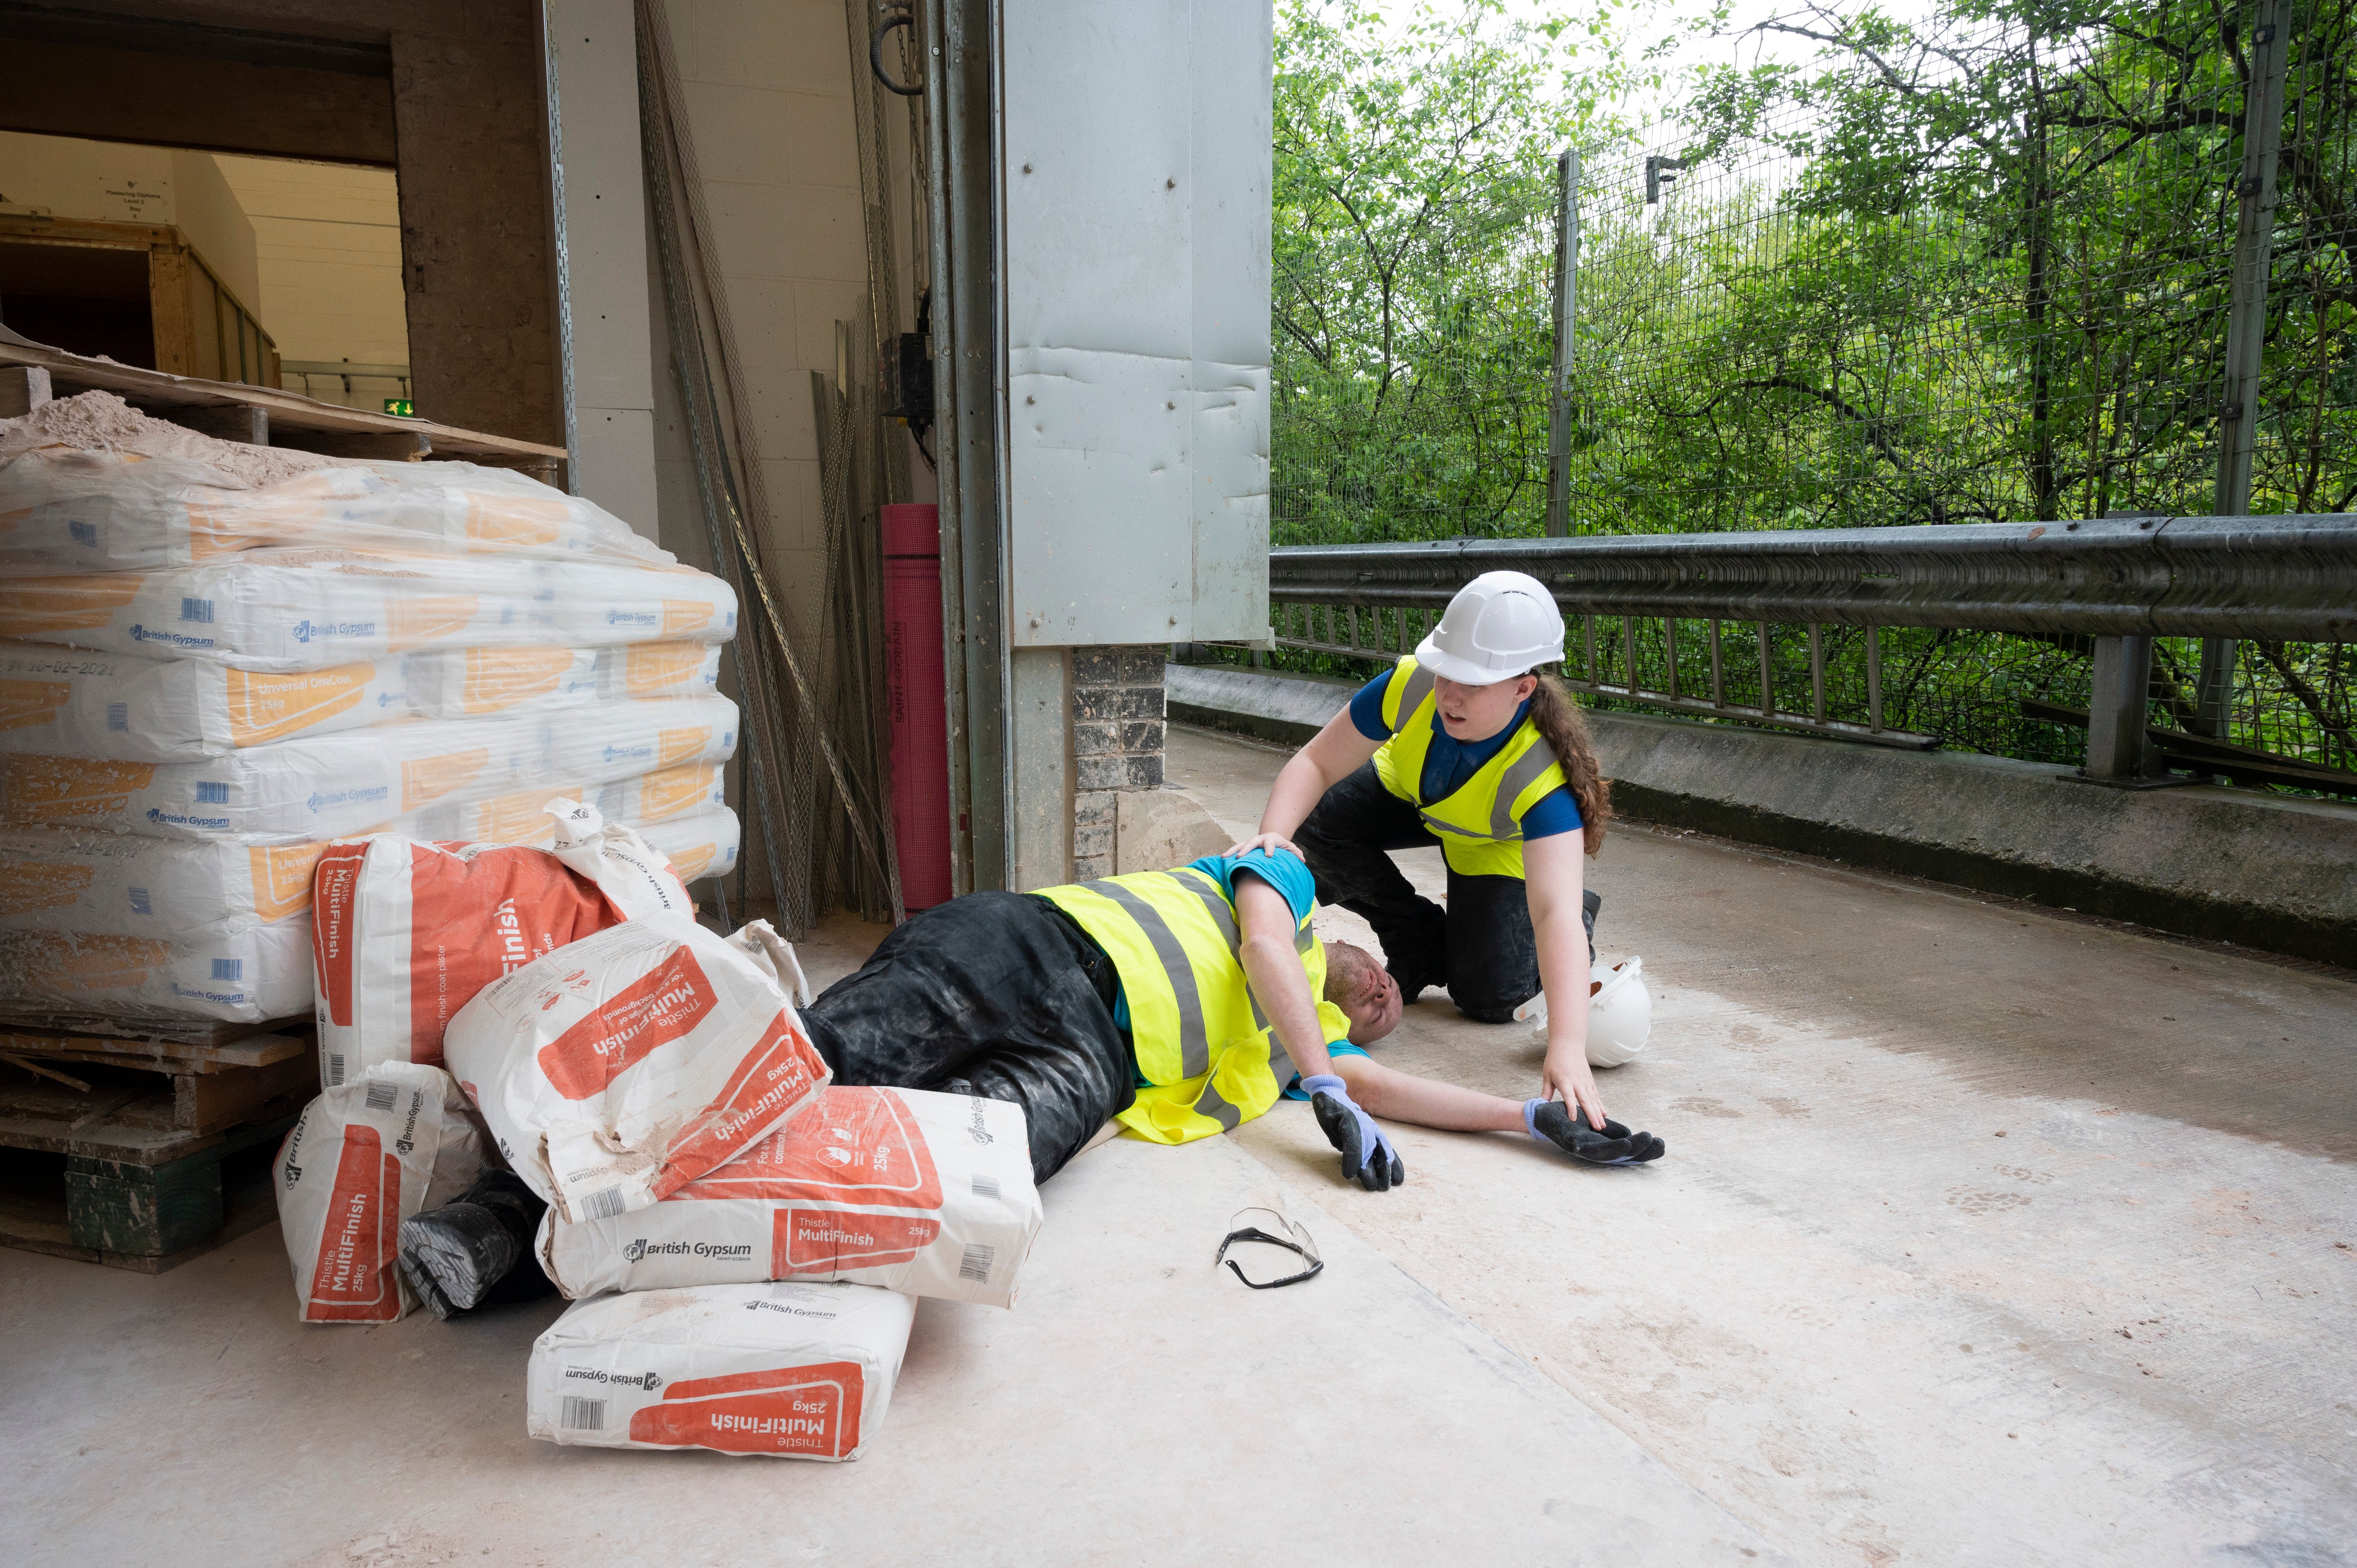 First aid for construction sites: Your blueprint for training confident first aiders